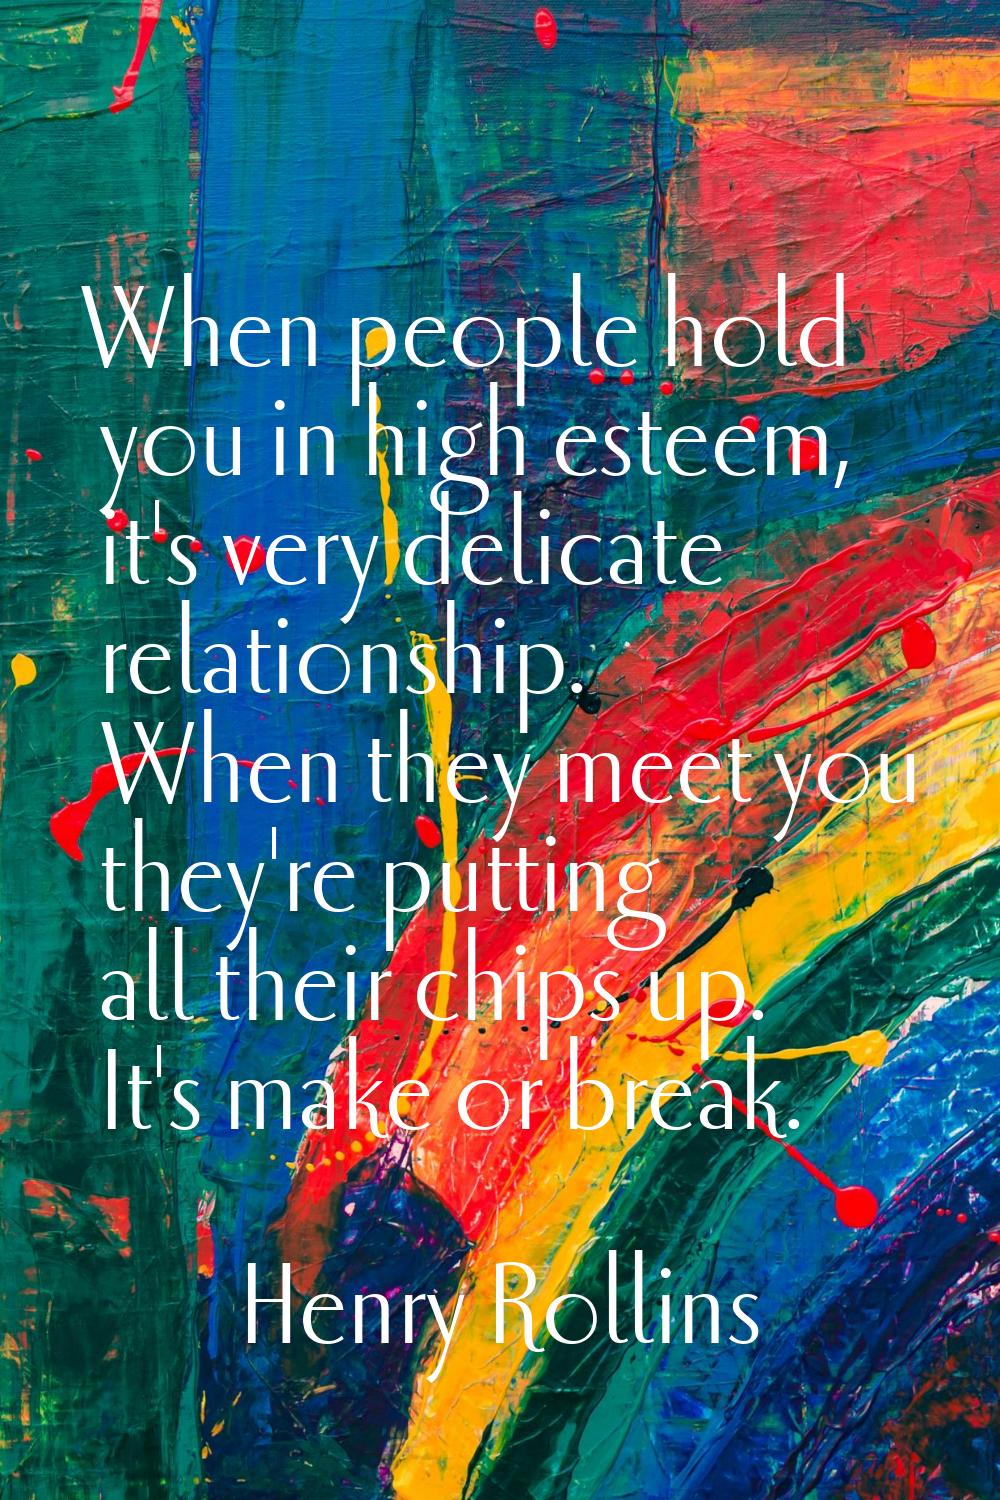 When people hold you in high esteem, it's very delicate relationship. When they meet you they're pu